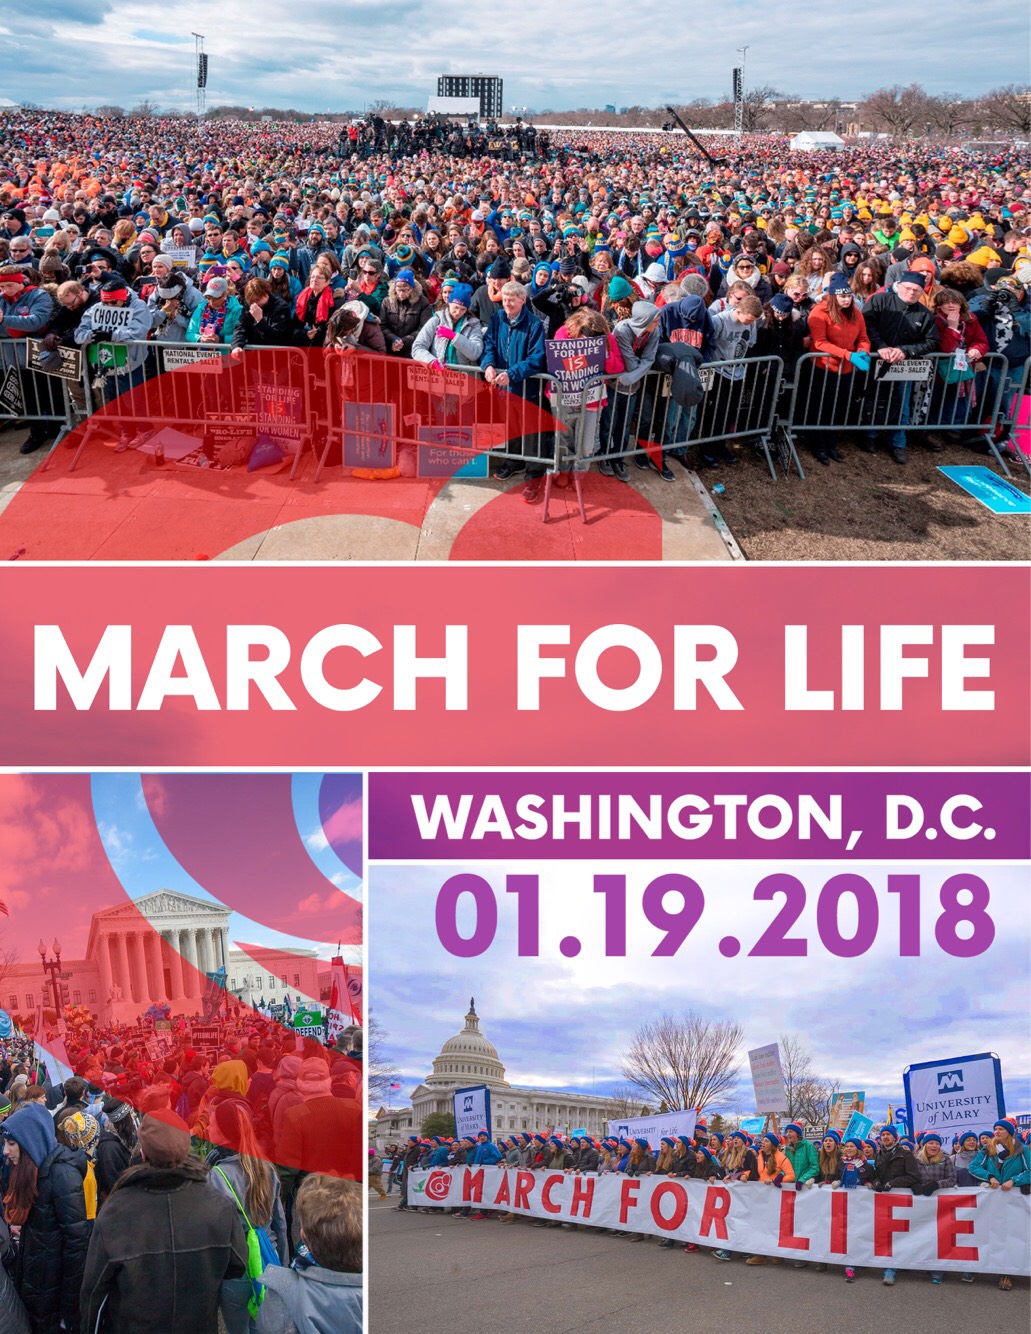 Illinois Federation for Right to Life: President Trump to address March for Life via ...